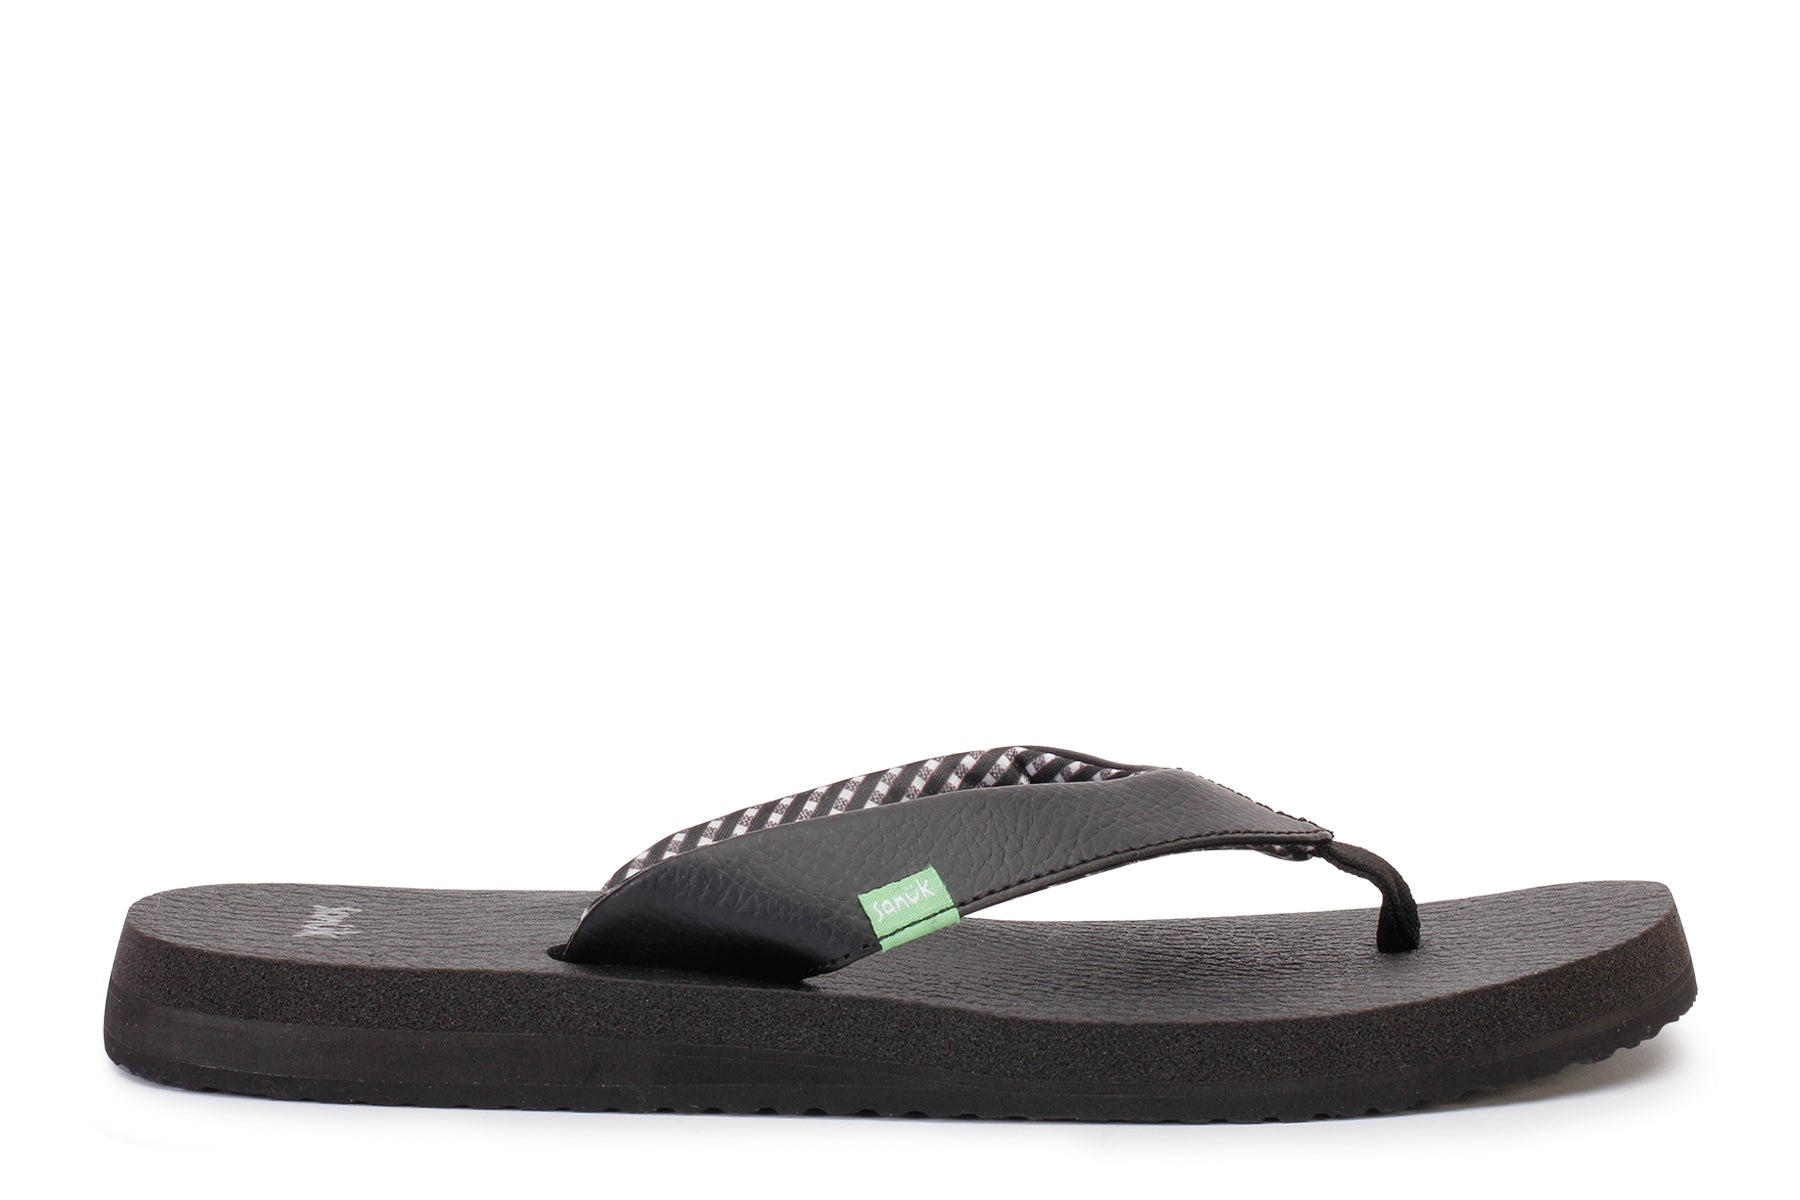 Strap into Yoga Mat Sandals with Sanuk!